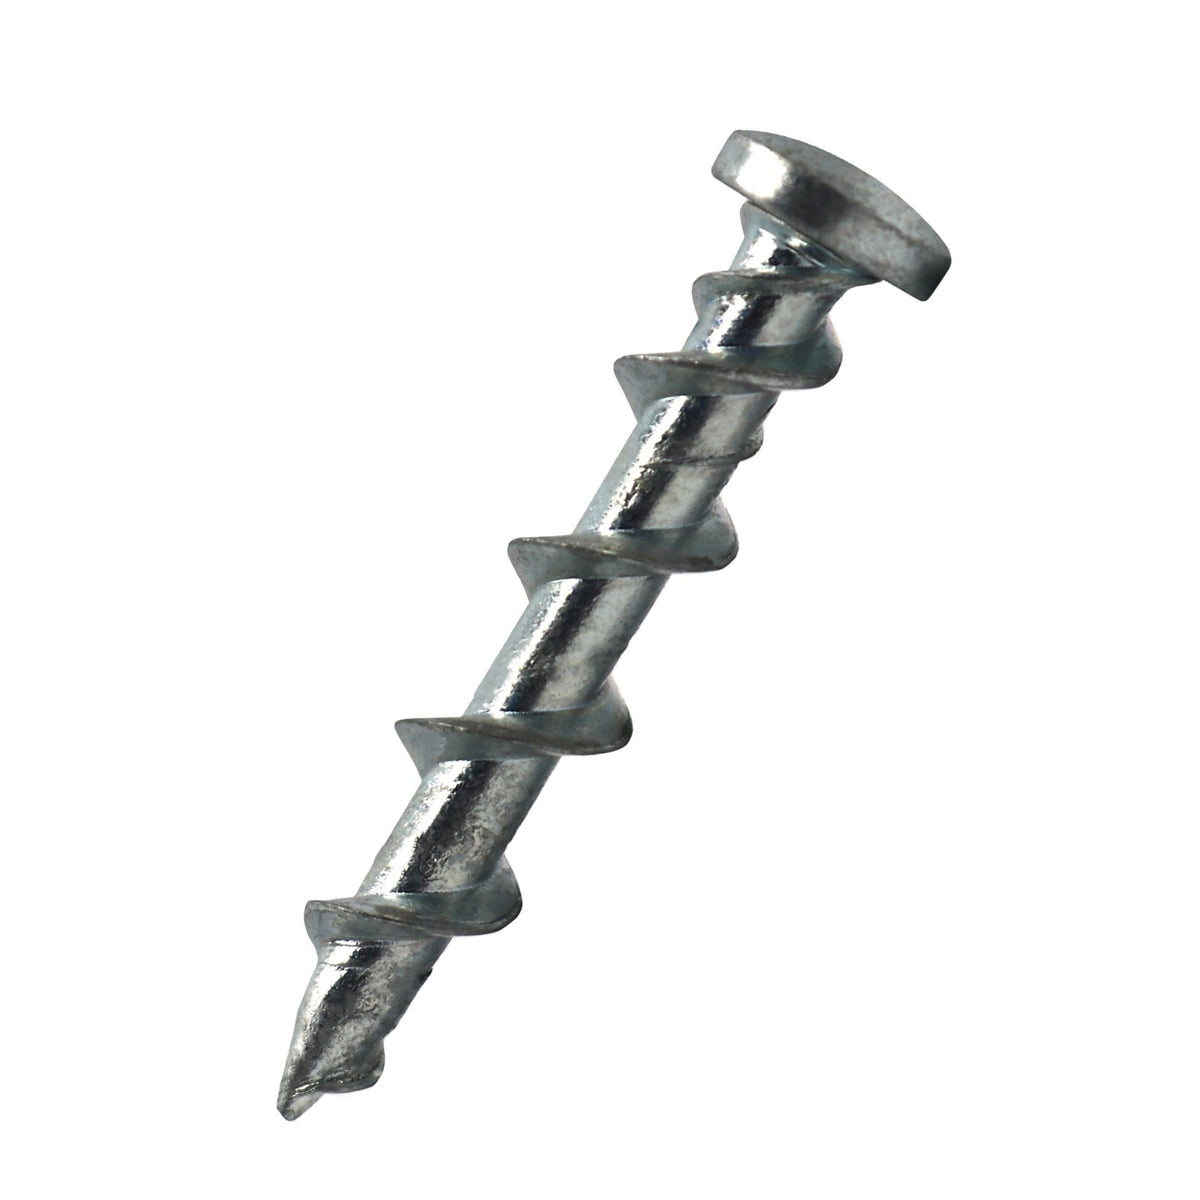 Wall Dog Screws - Best Wall Screws for Drywall, Plaster, and Masonry Wall - SC-WDSX - Picture Hang Solutions